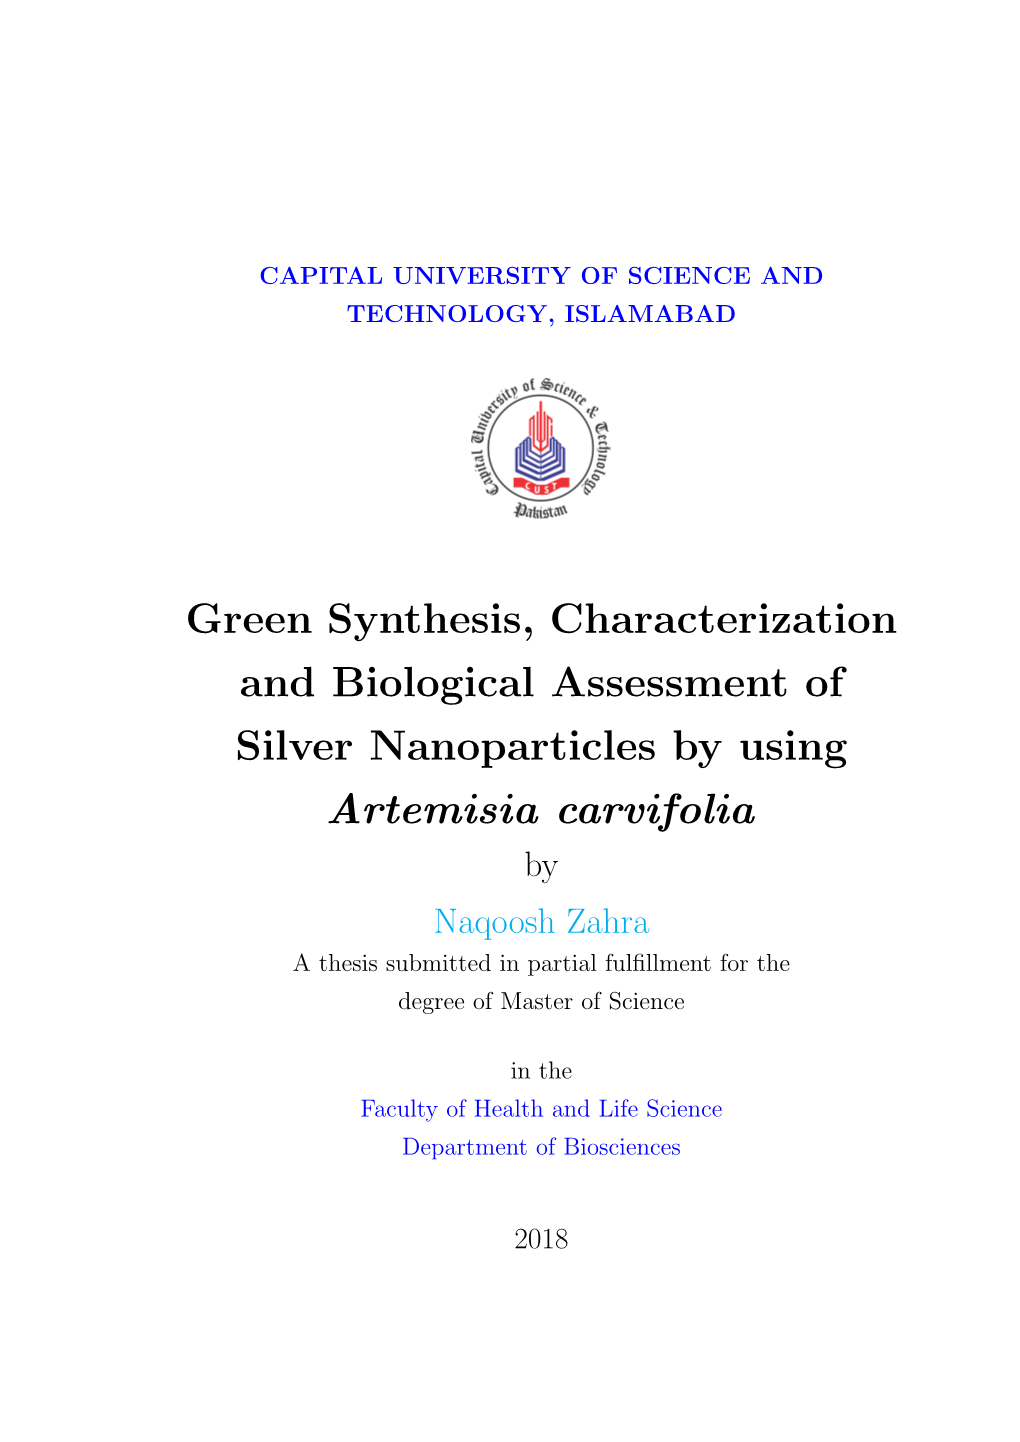 Green Synthesis, Characterization and Biological Assessment of Silver